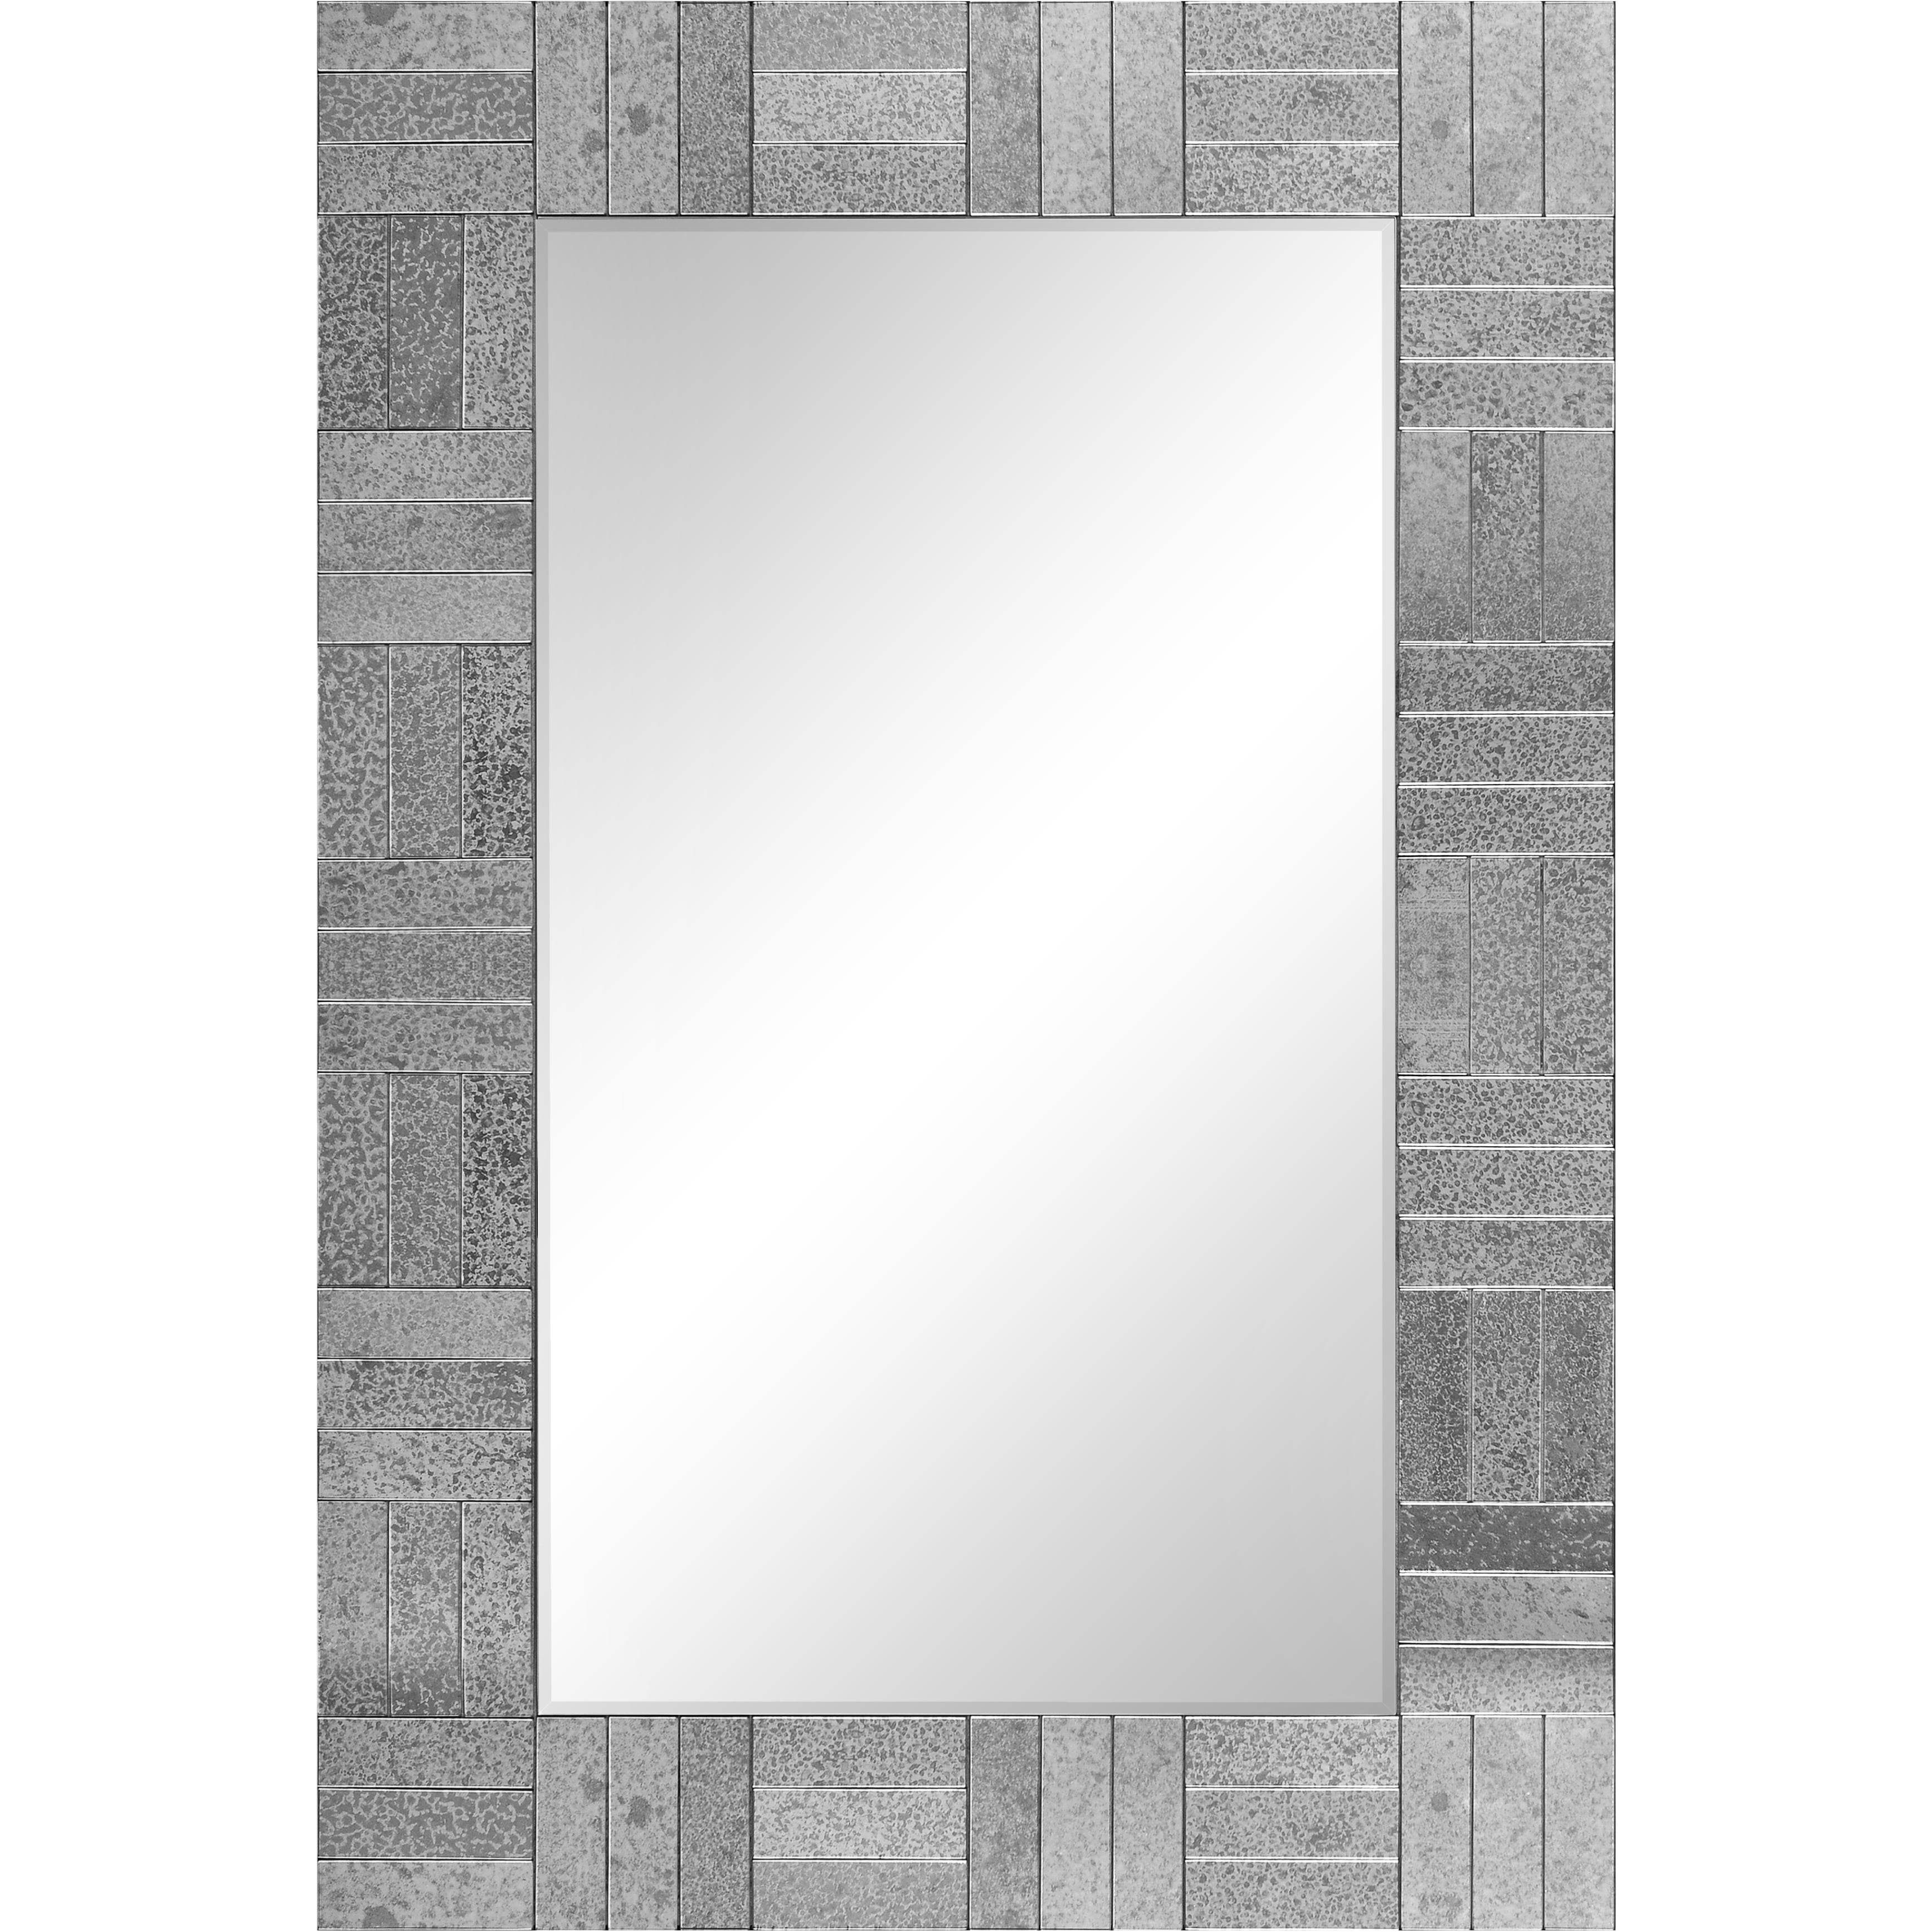 Picture of Camden Isle 86482 24 x 36 in. Columbia Wall Mirror